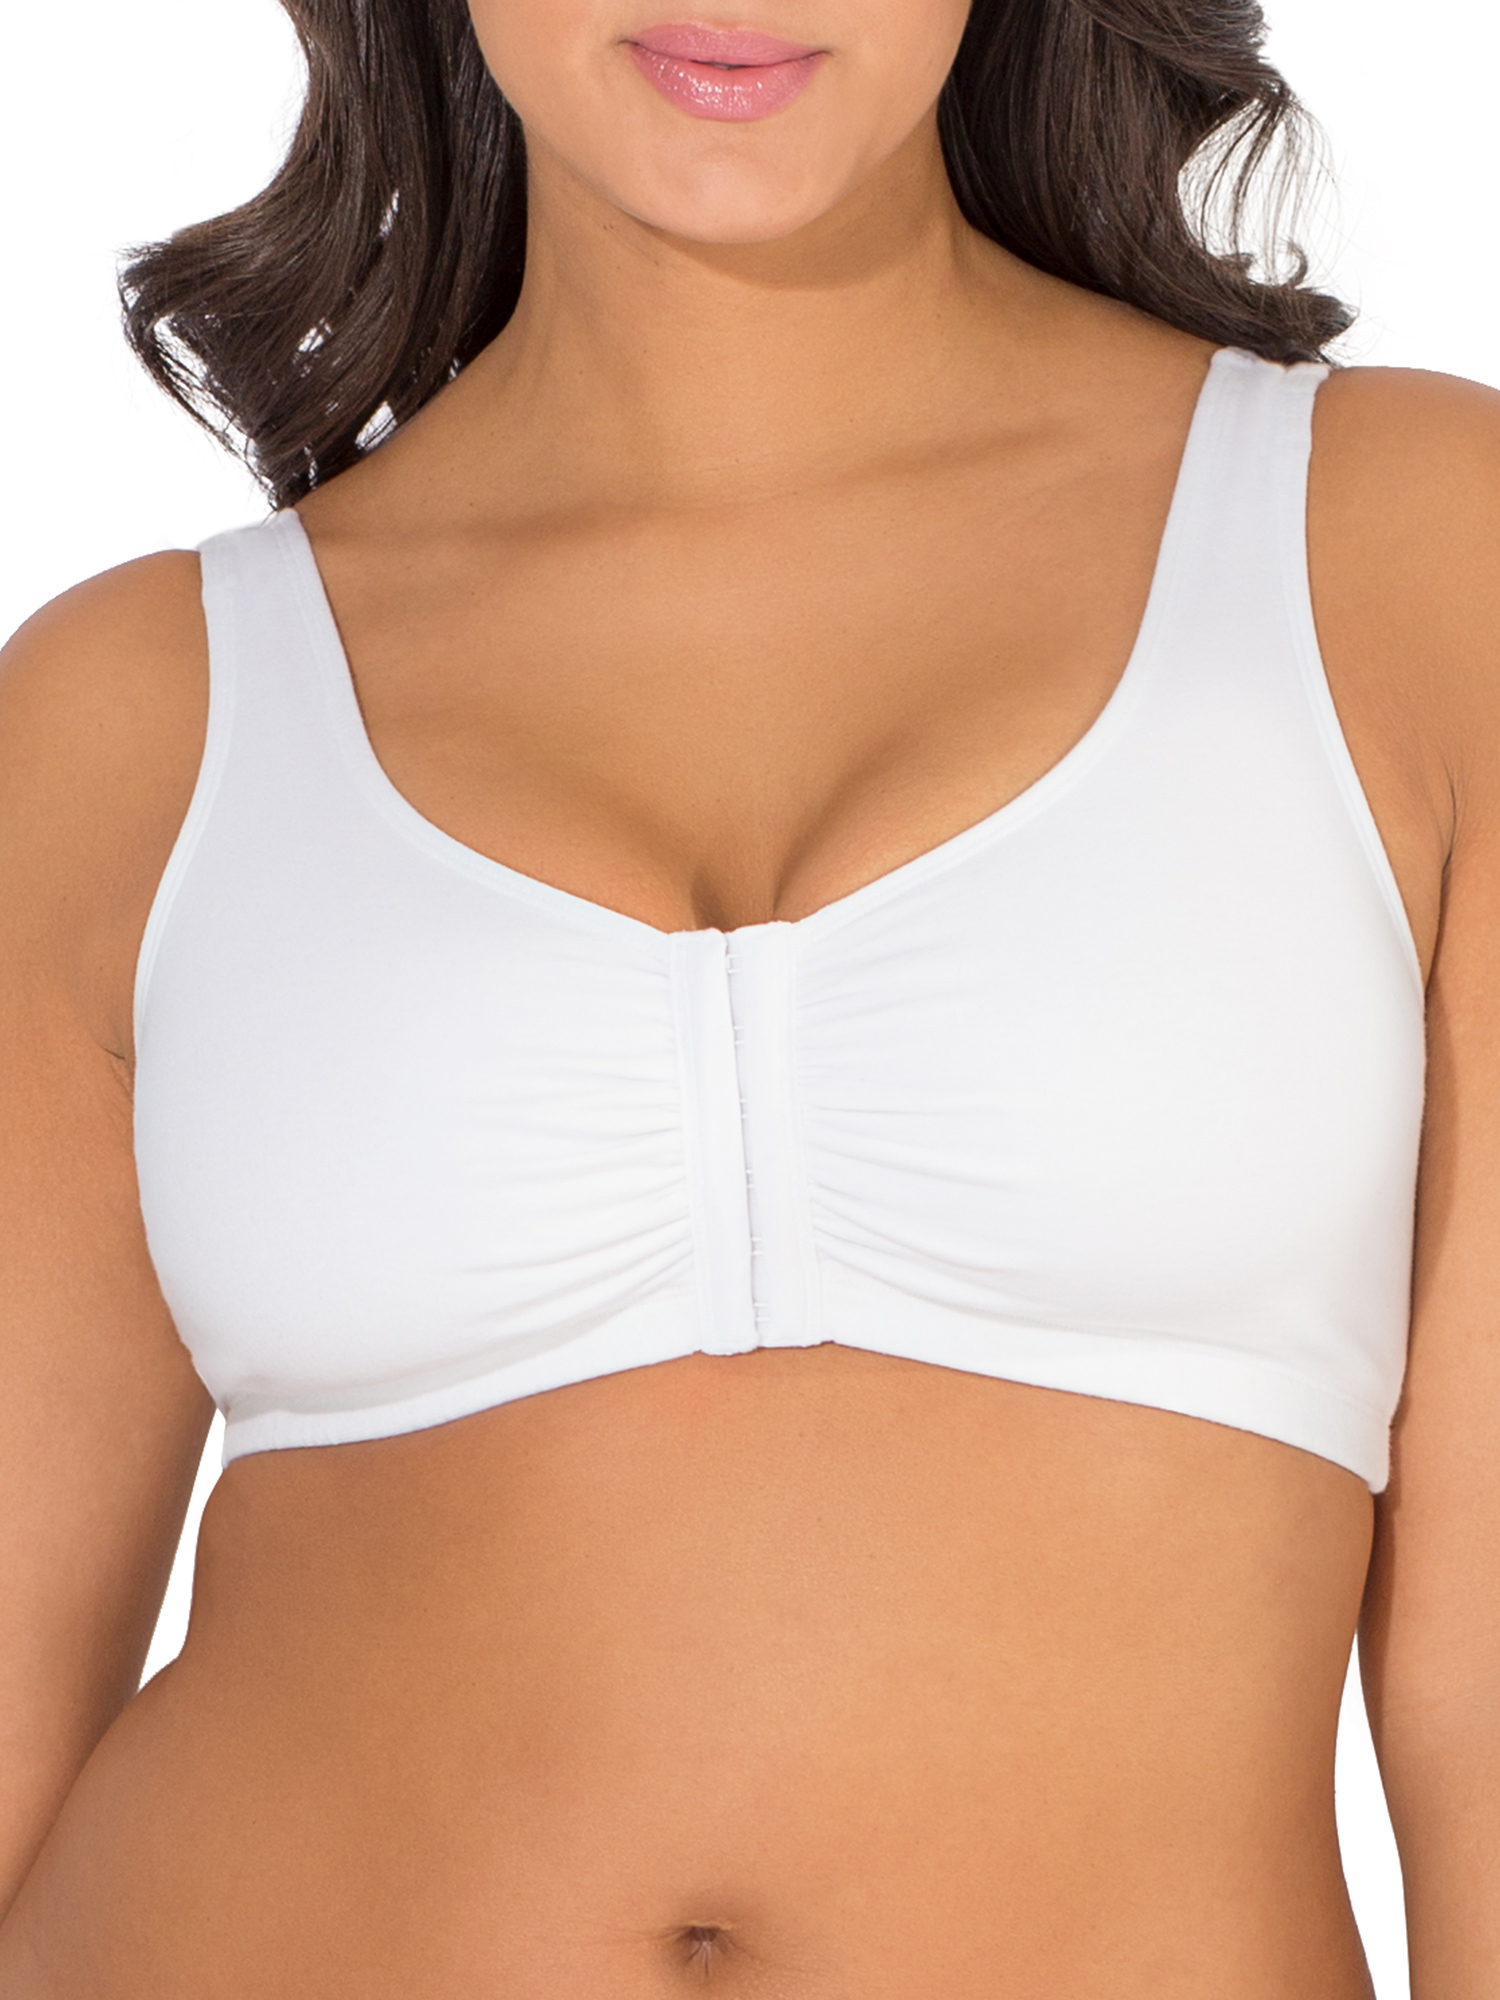 Fruit of the Loom - Comfort Front-Close Sports Bra, Style&nbsp;96014D, 3-Pack - image 2 of 8